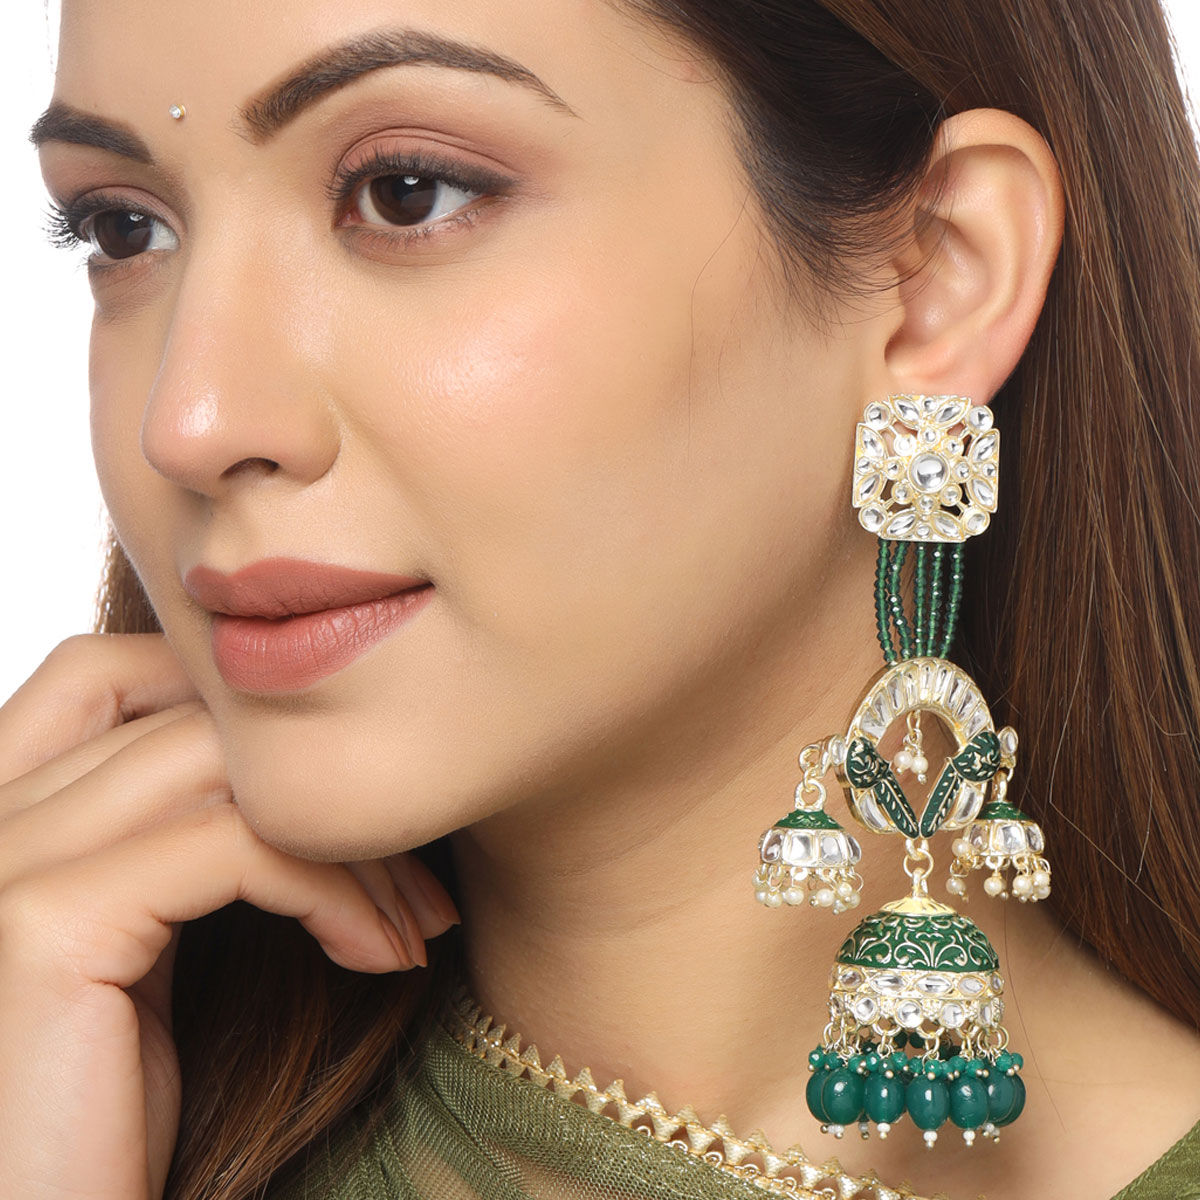 Joules By Radhika MultiColor Chandelier Earrings Buy Joules By Radhika  MultiColor Chandelier Earrings Online at Best Price in India  Nykaa